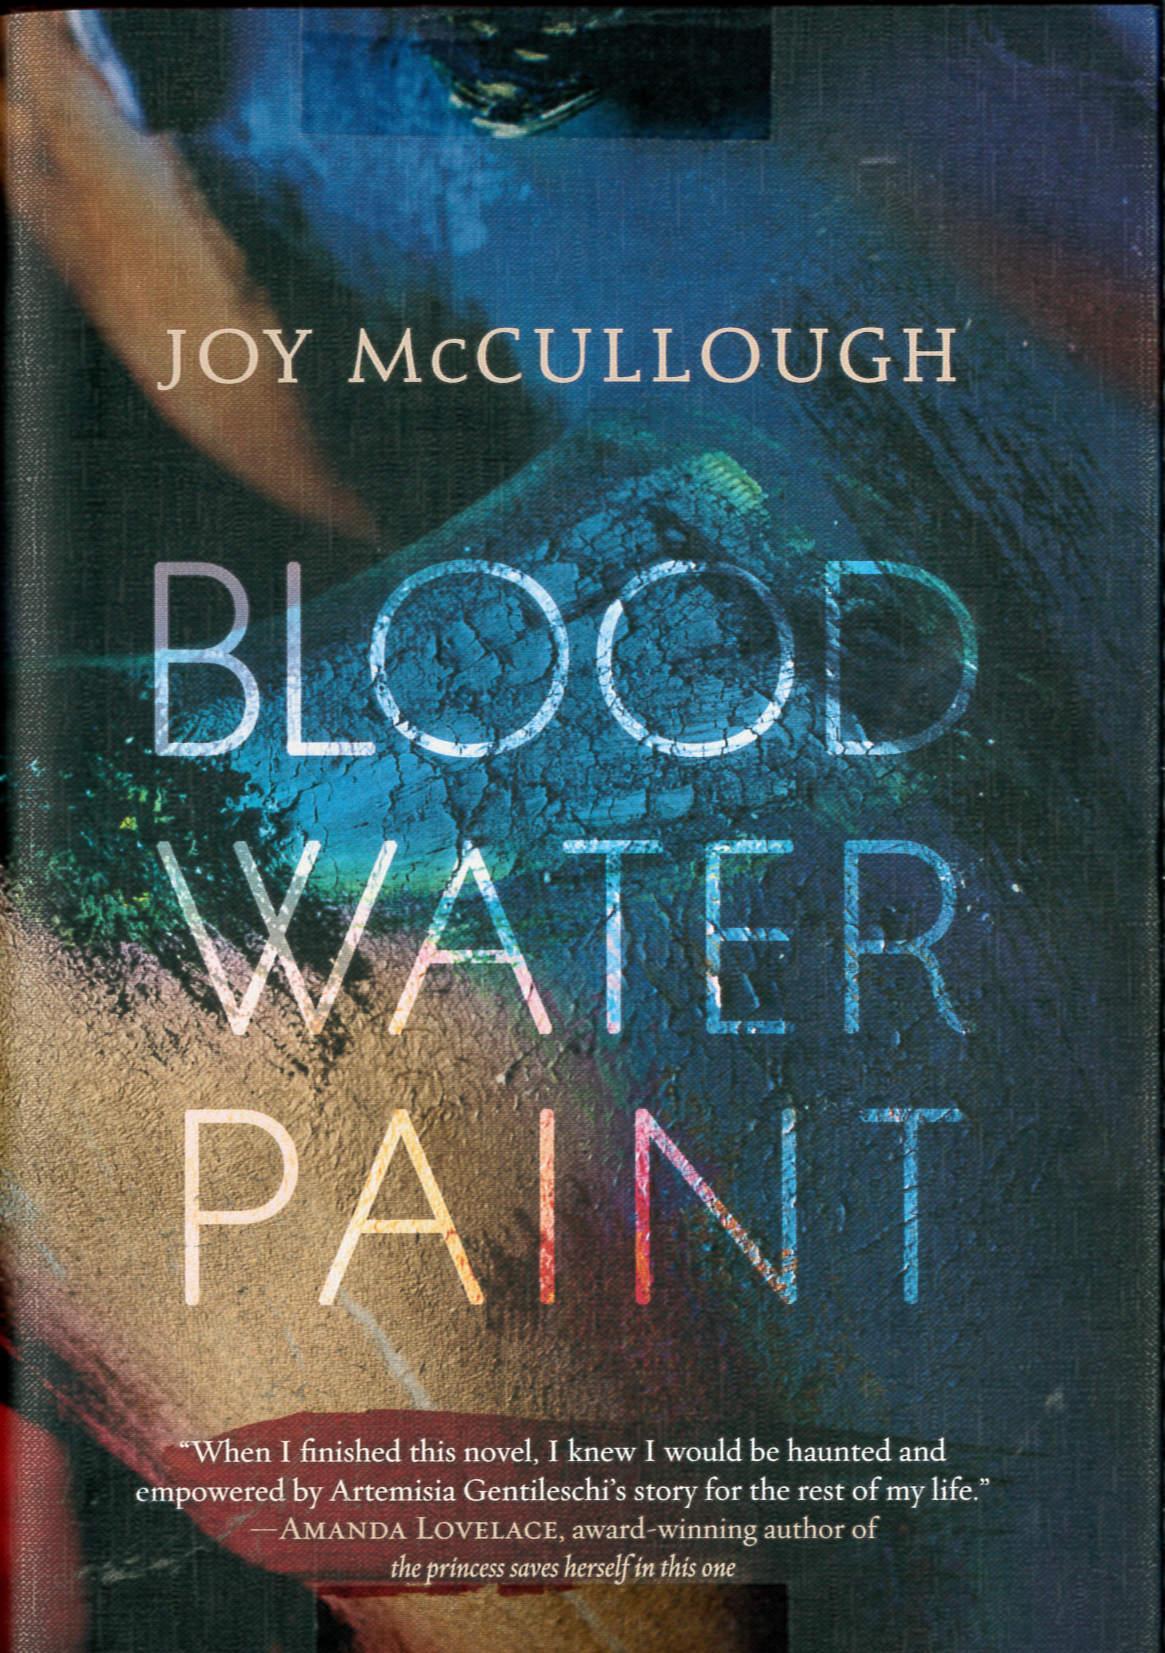 Blood water paint /